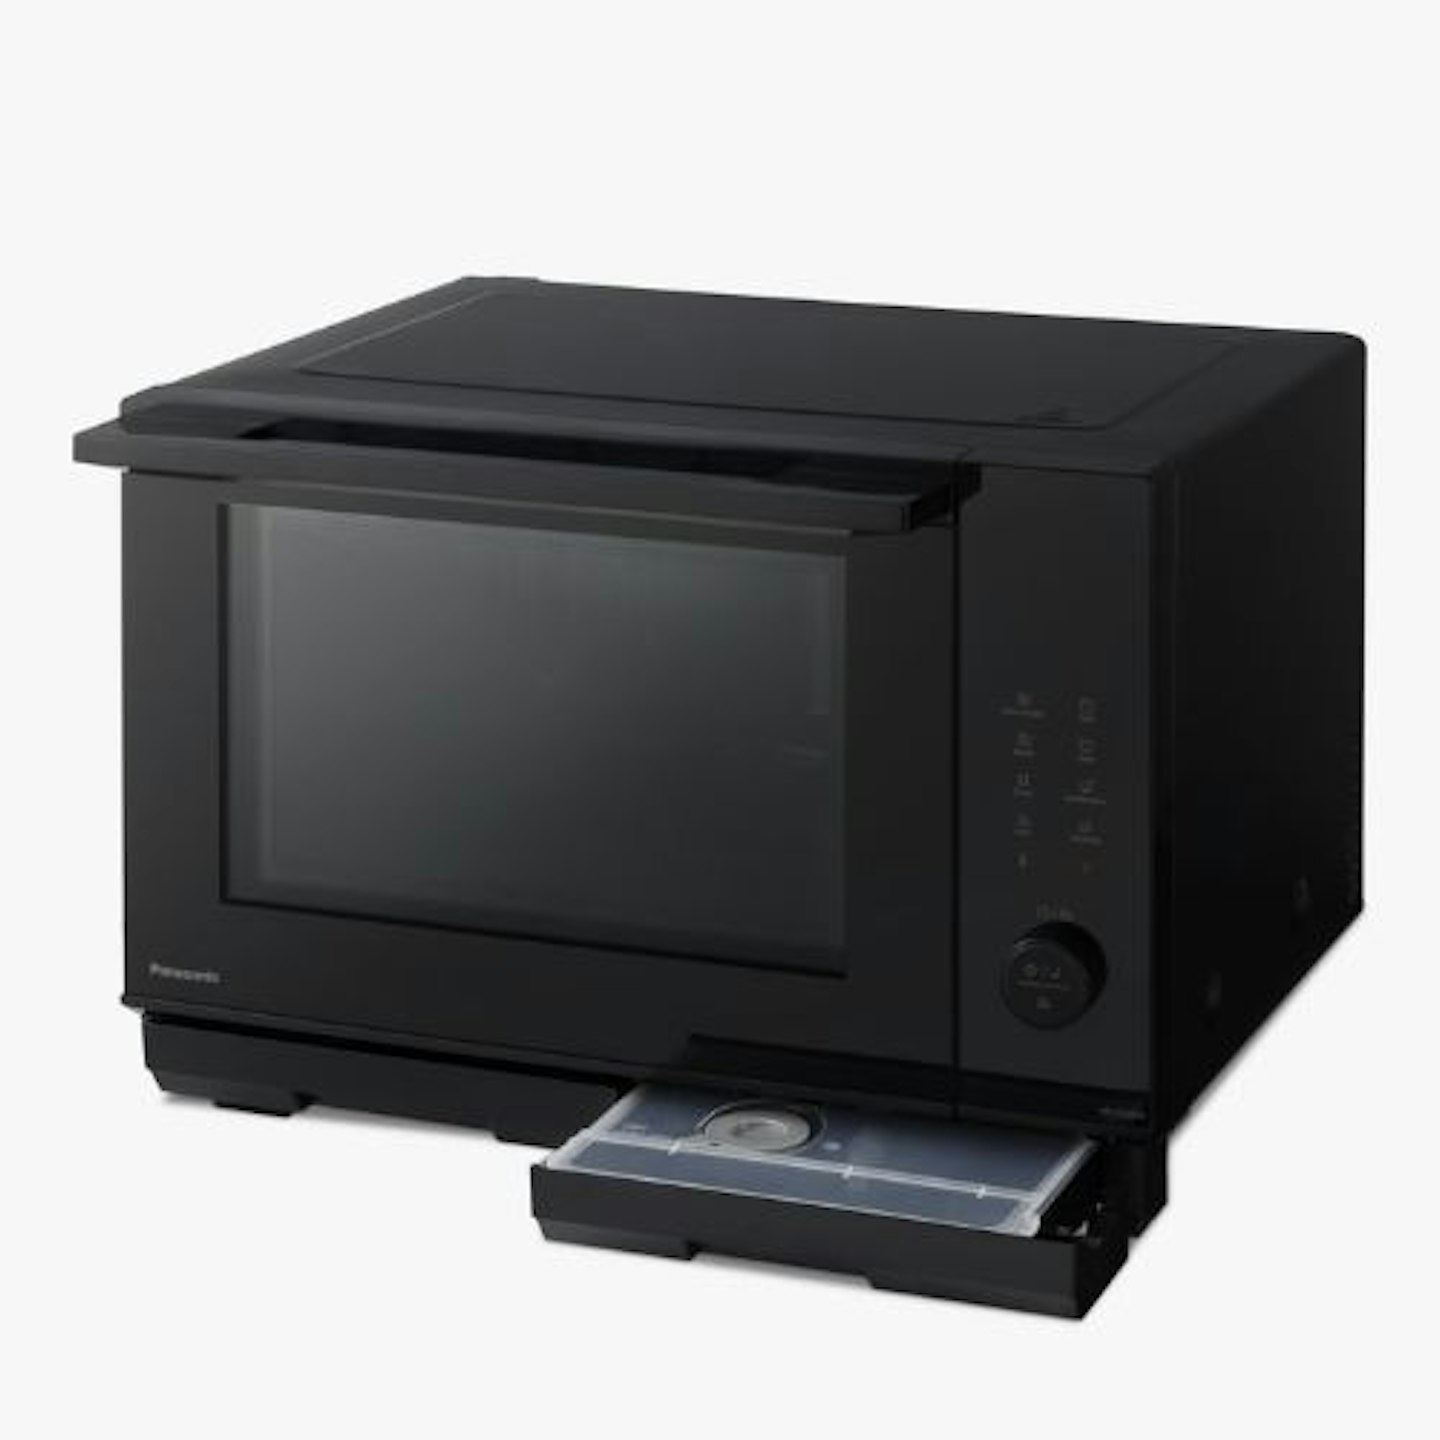 NN-DS59NBBPQ 4-in-1 Steam Combination Microwave Oven, Black